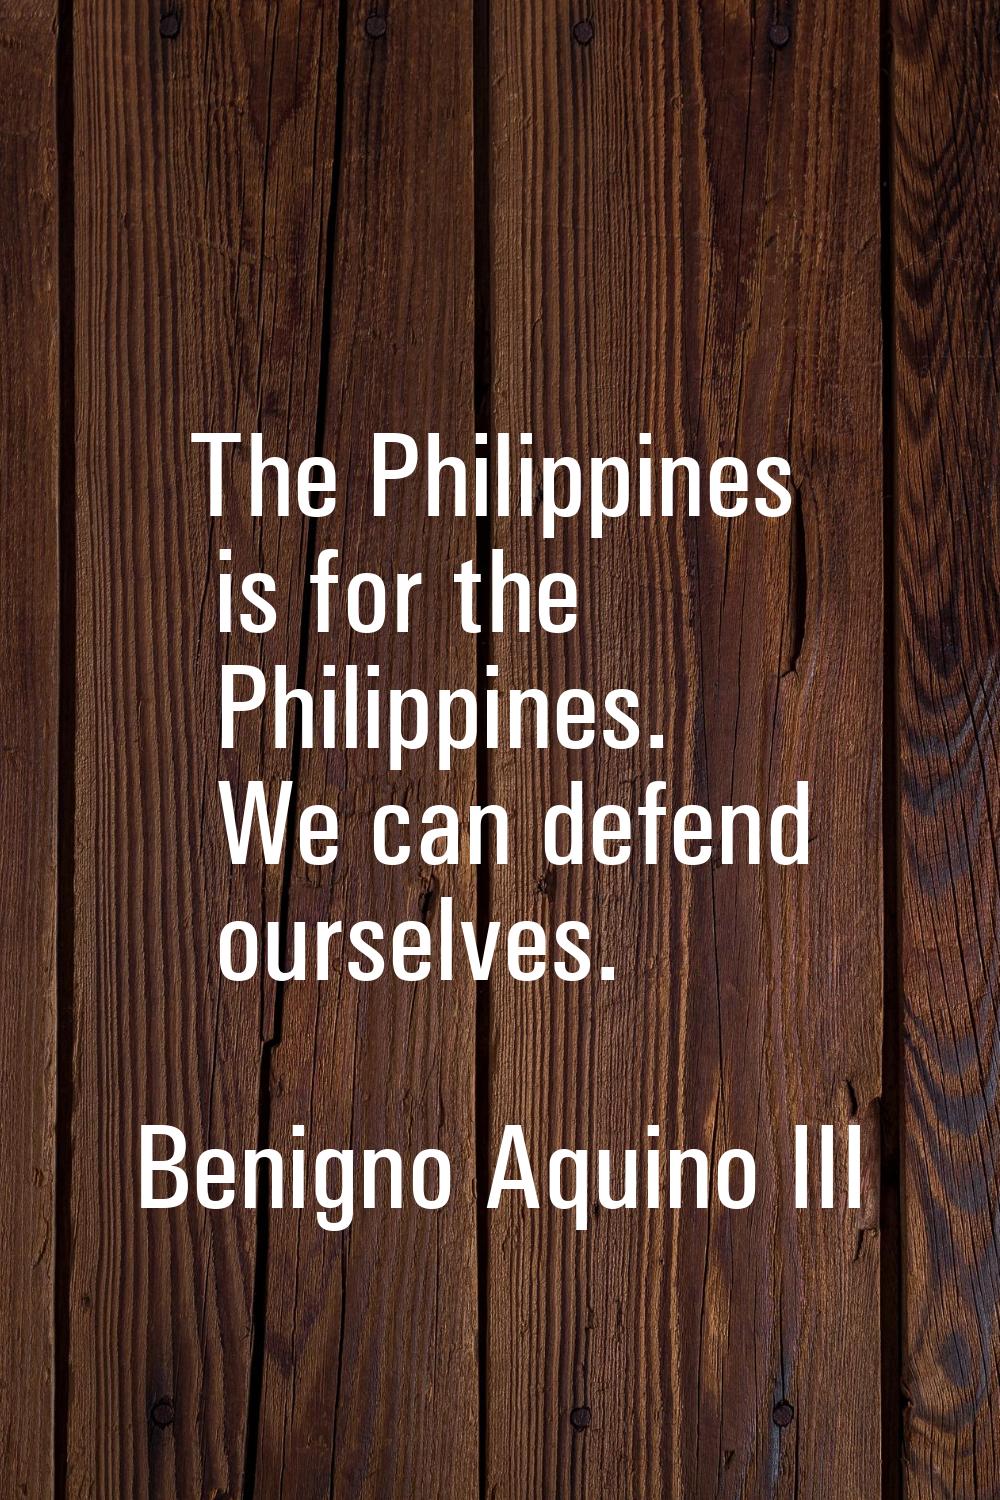 The Philippines is for the Philippines. We can defend ourselves.